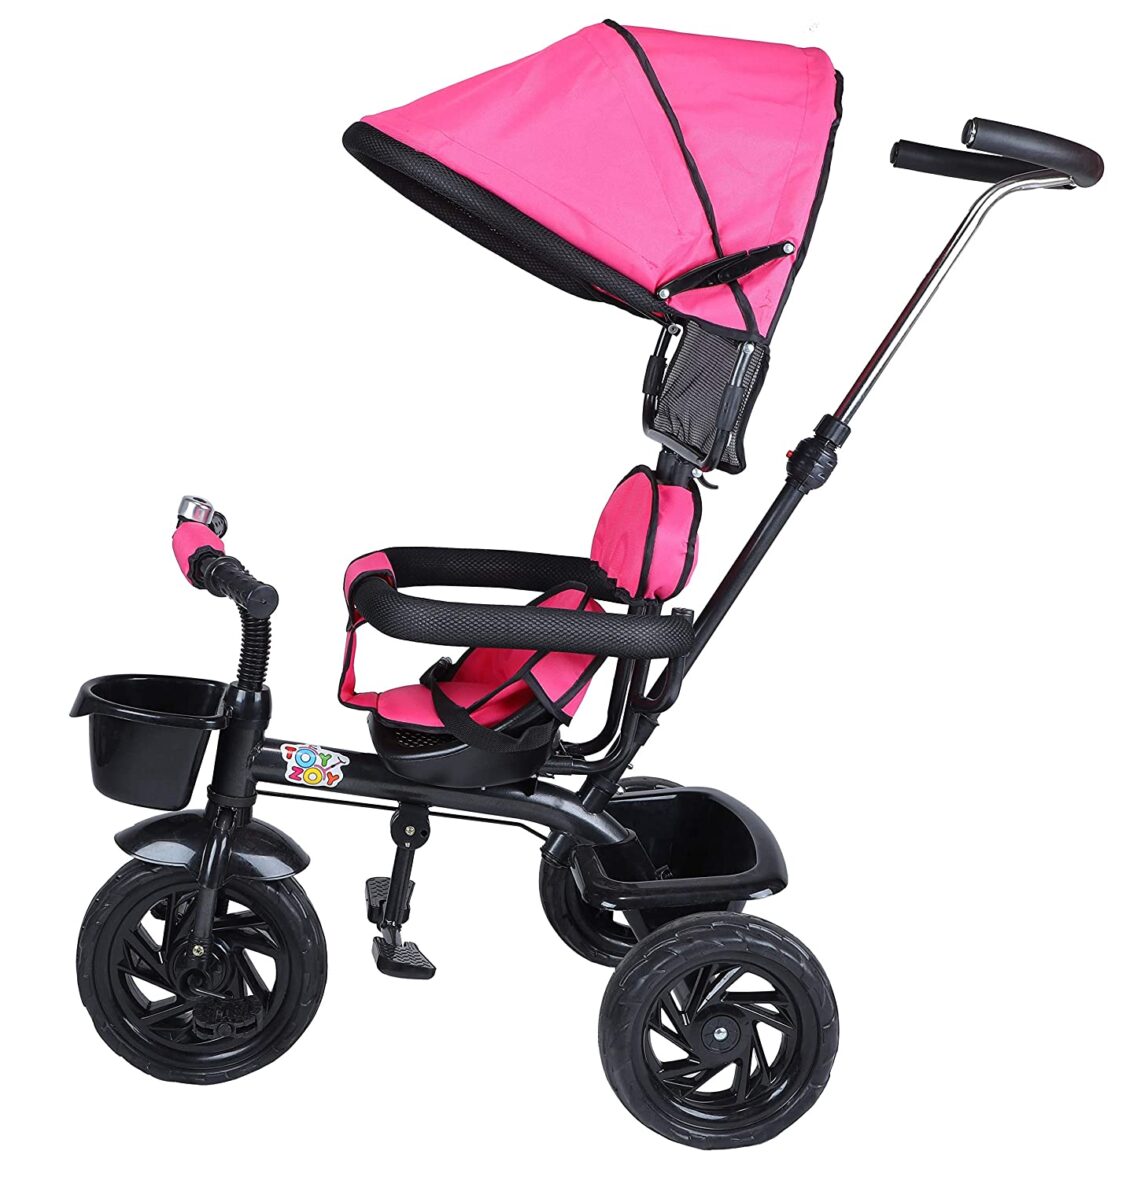 Toyzoy Maple Pro Max Kids|Baby Trike|Tricycle with Canopy for Kids|Boys|Girls Age Group 2 to 5 Years, TZ-532 (Pink)4